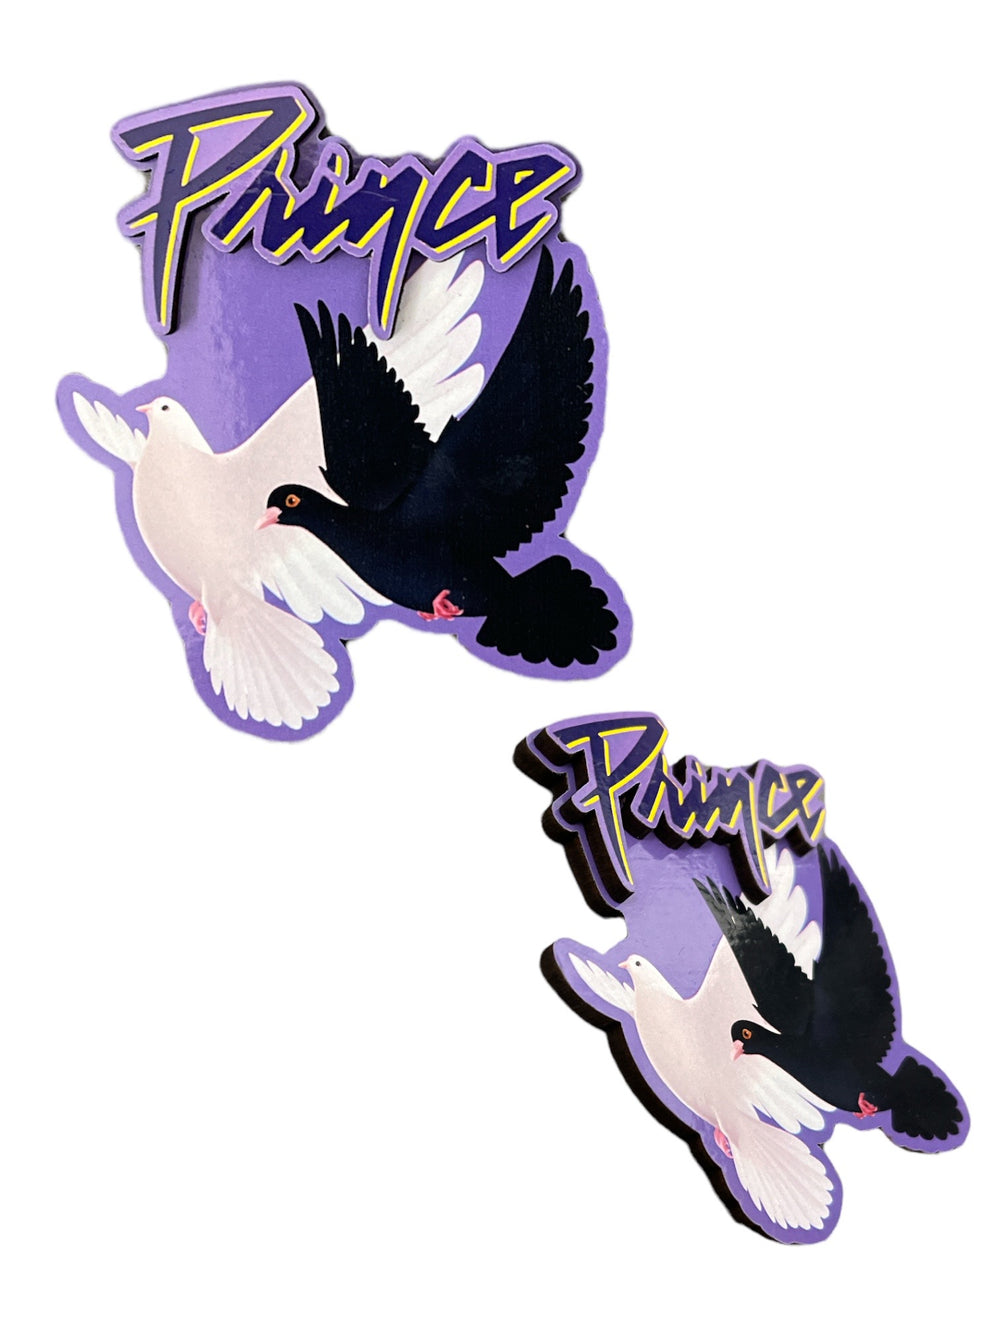 Prince – Paisley Park Official Estate Chunky Magnet Brand New Doves